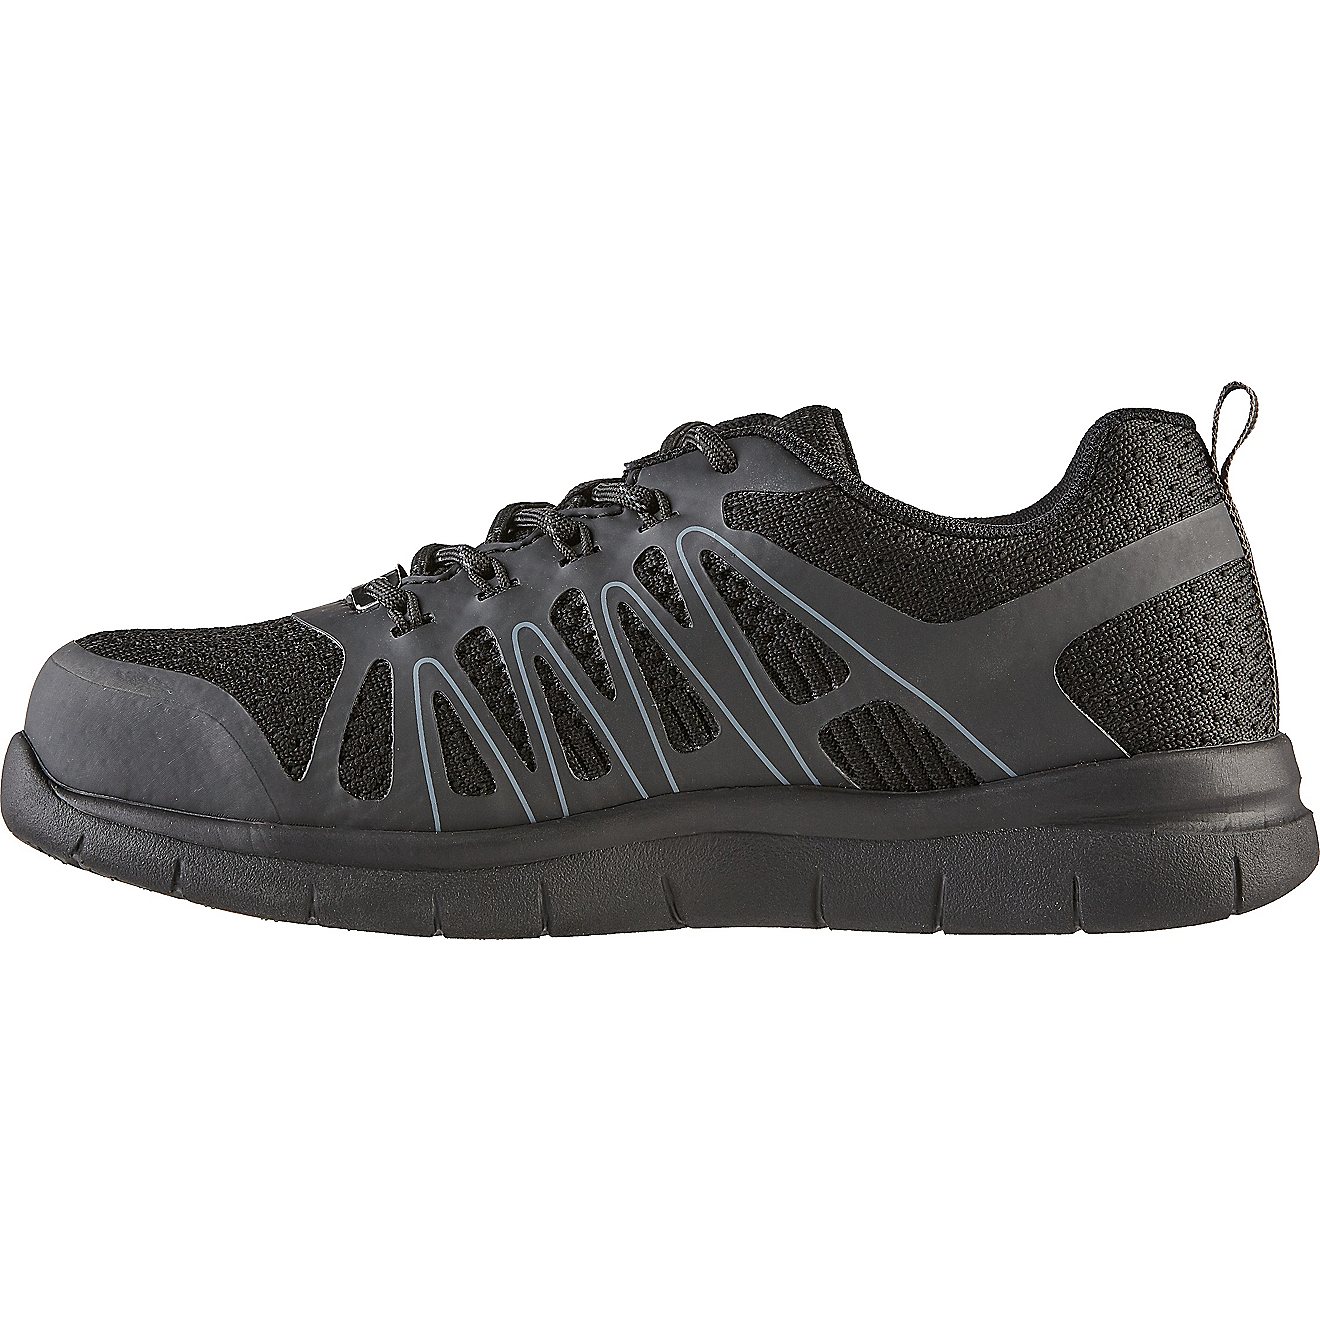 Brazos Women's Fallon Steel Toe Athletic Shoes                                                                                   - view number 2